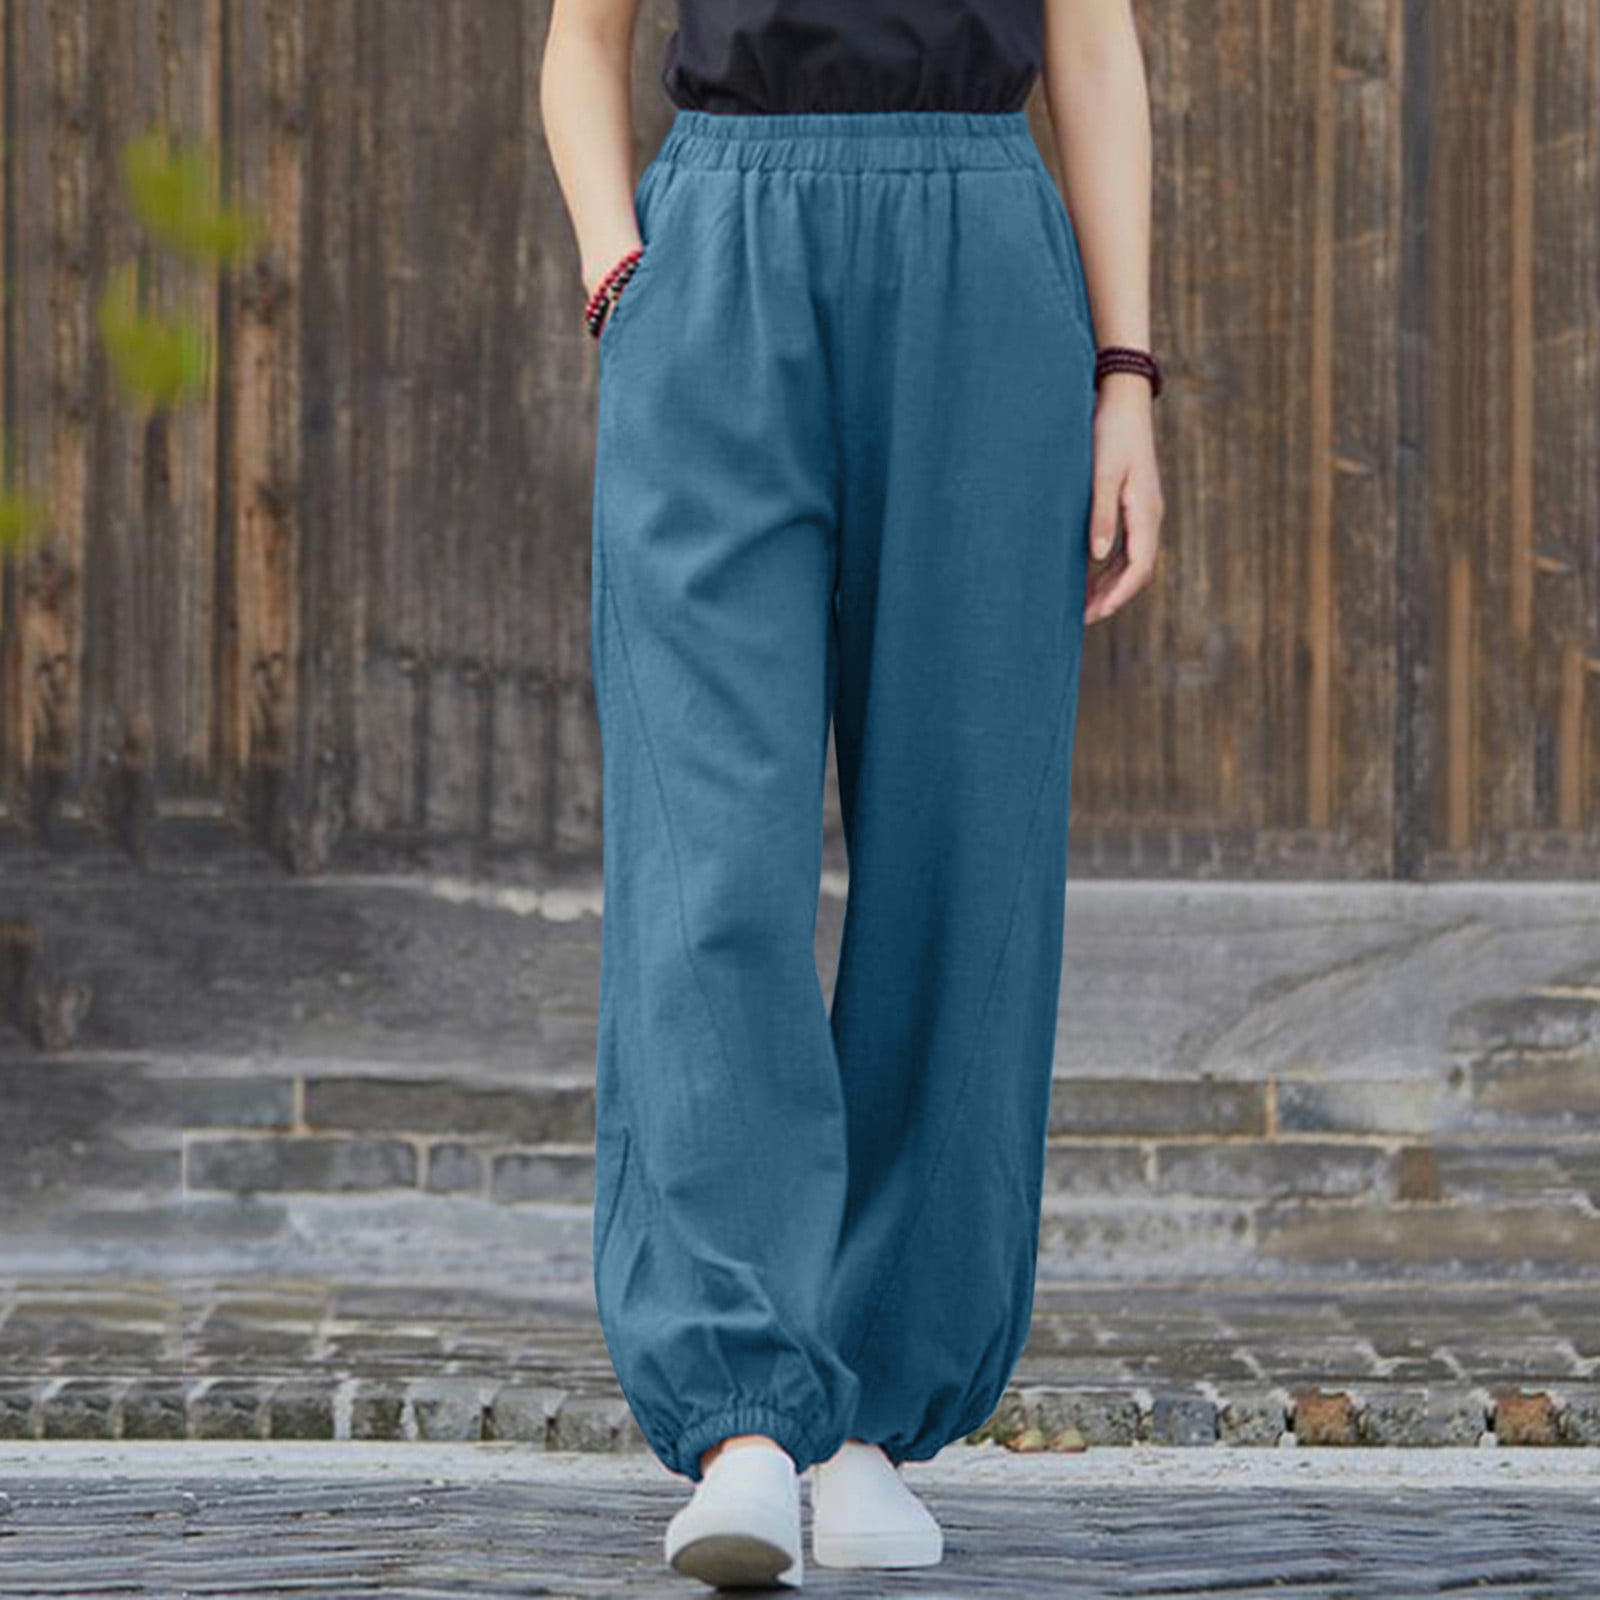 Casual Pants for Women for Work Tall Women Casual High Waisted Pants Leg Long  Pant Trousers With Pocket Loose Solid Pants Women Linen Pants 